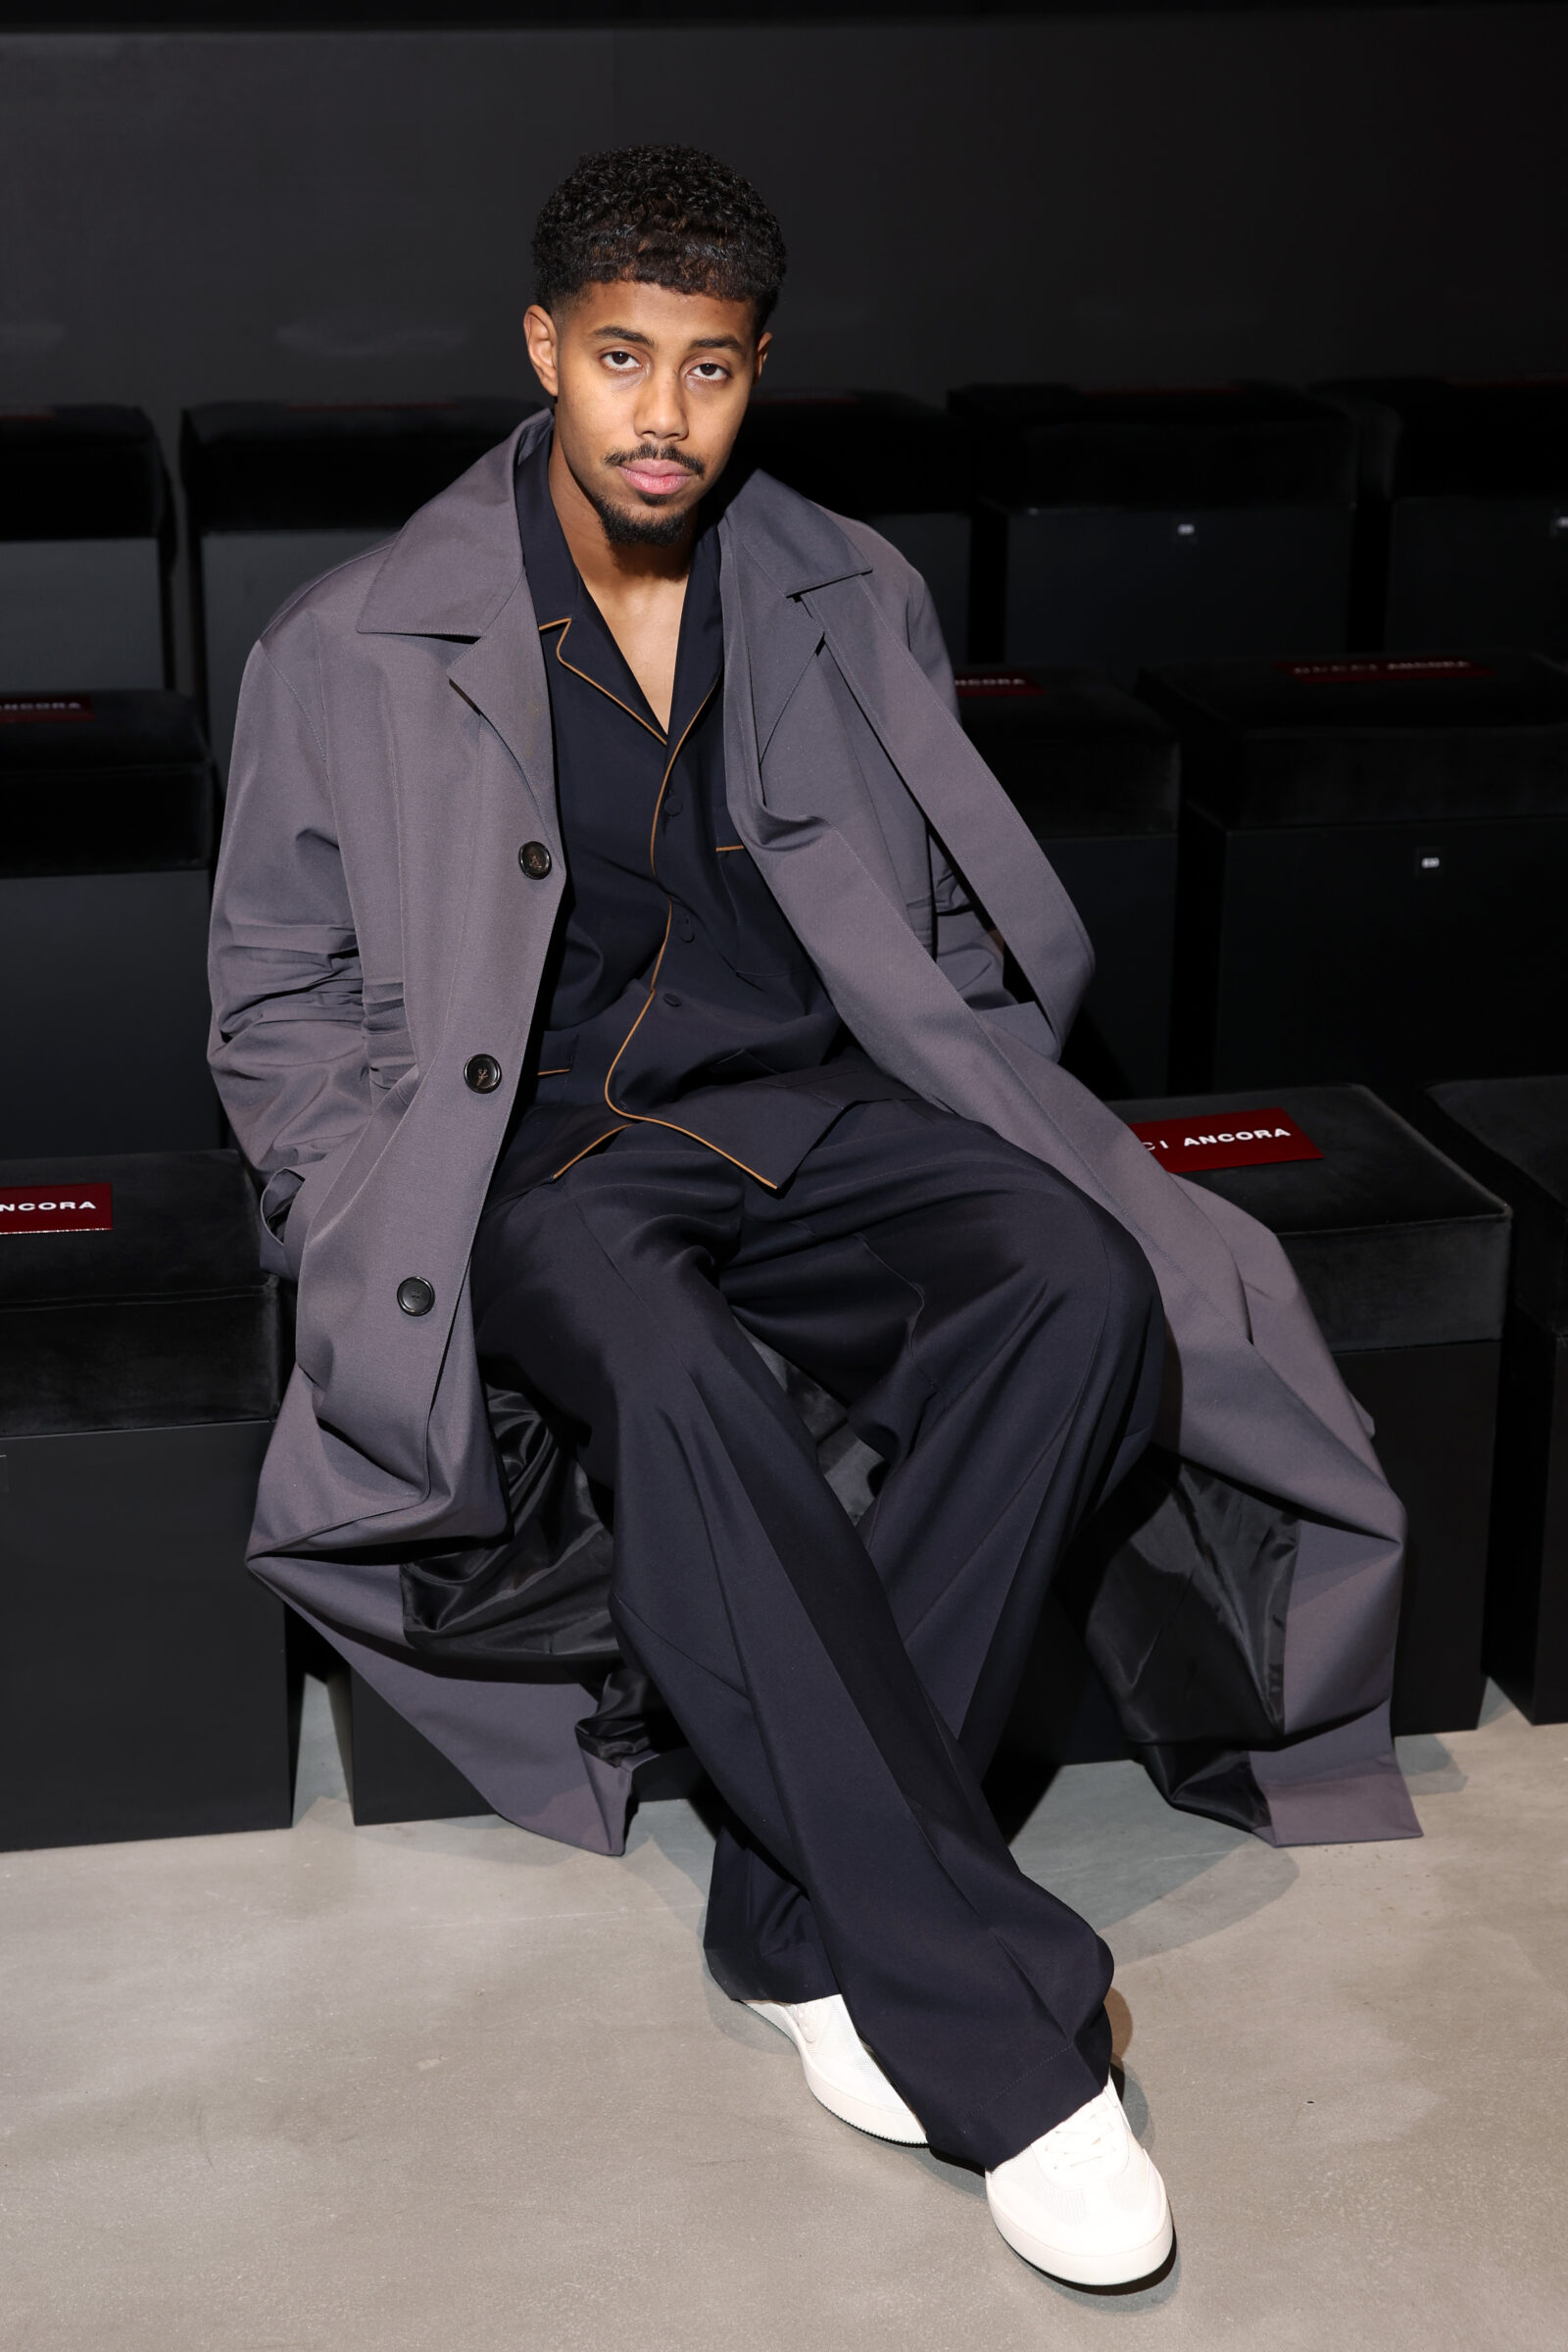 Mustafa Ahmed attends the Gucci Ancora Fashion Show during Milan Fashion Week 